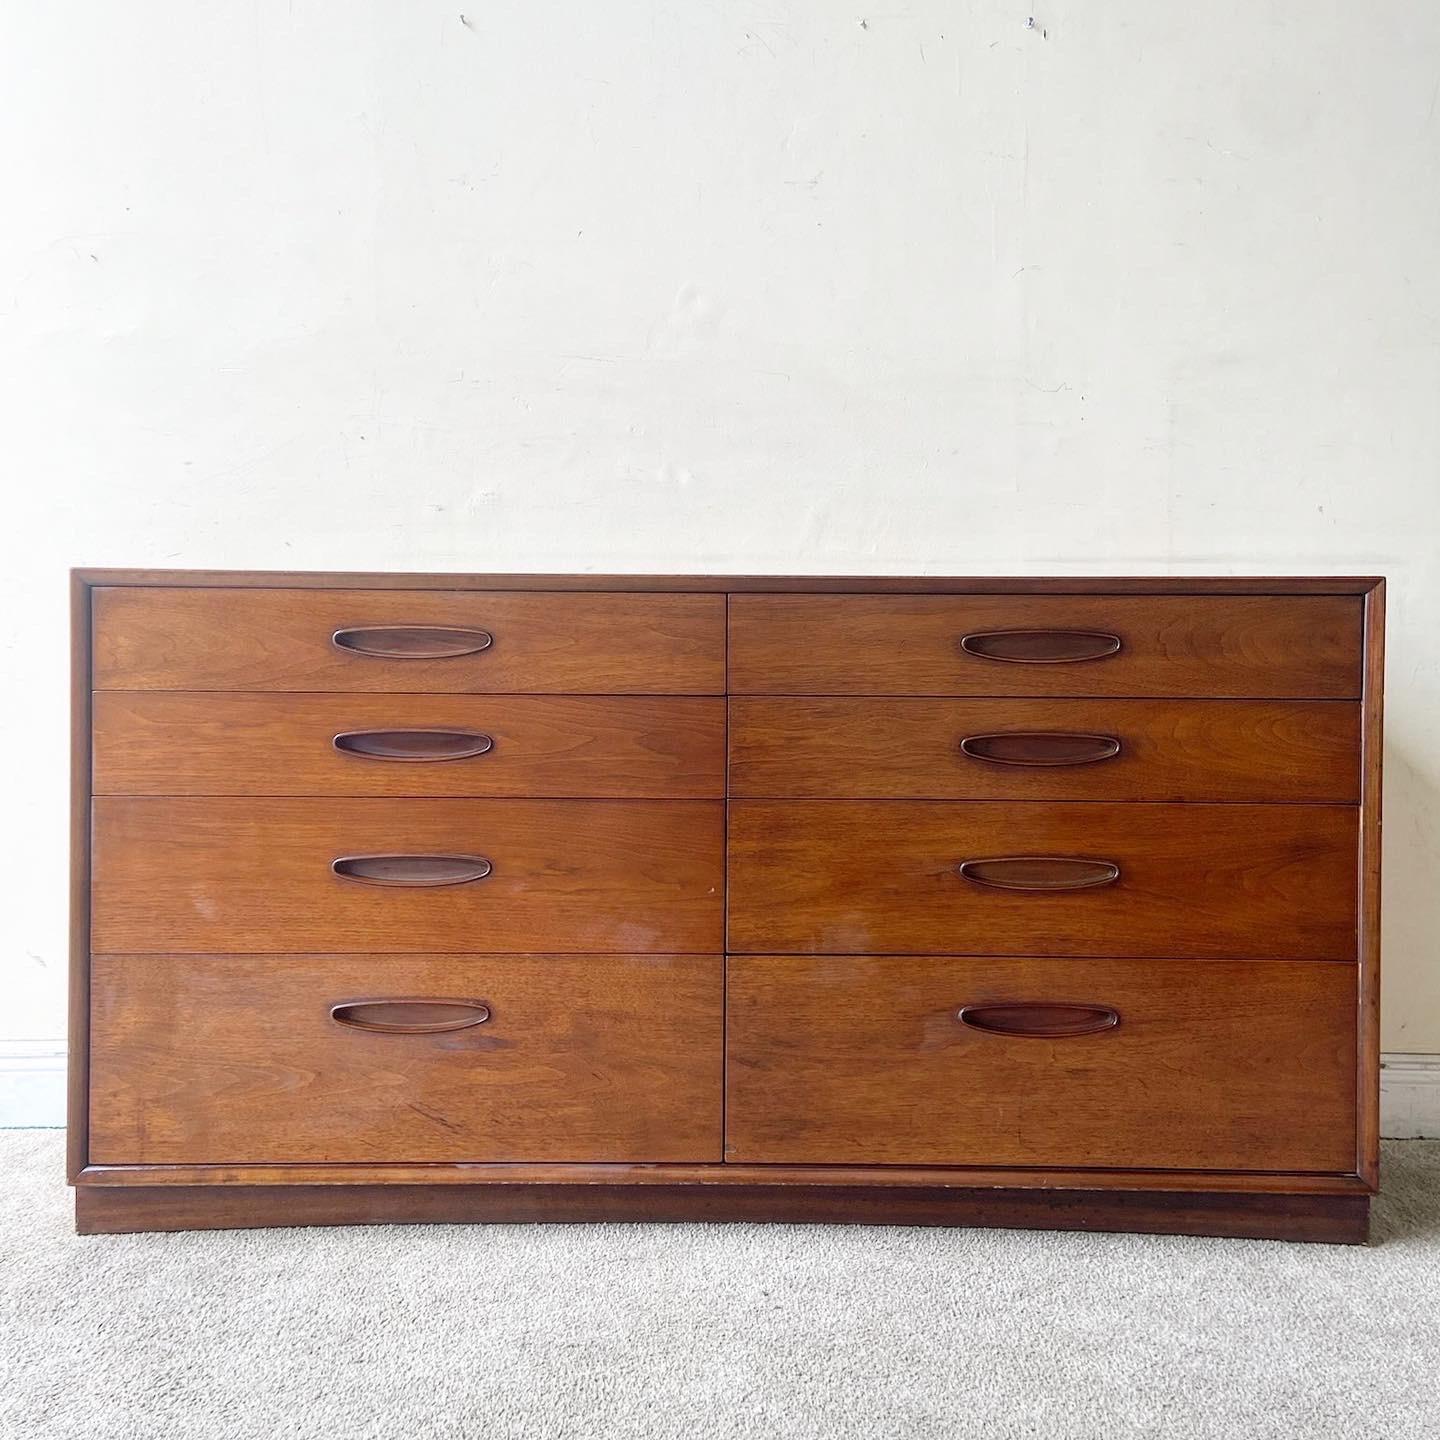 Exceptional Mid-Century Modern lowboy dresser by Henredon. Features an inlayed veneer over the top with fabulous symmetrical drawer handles.
 